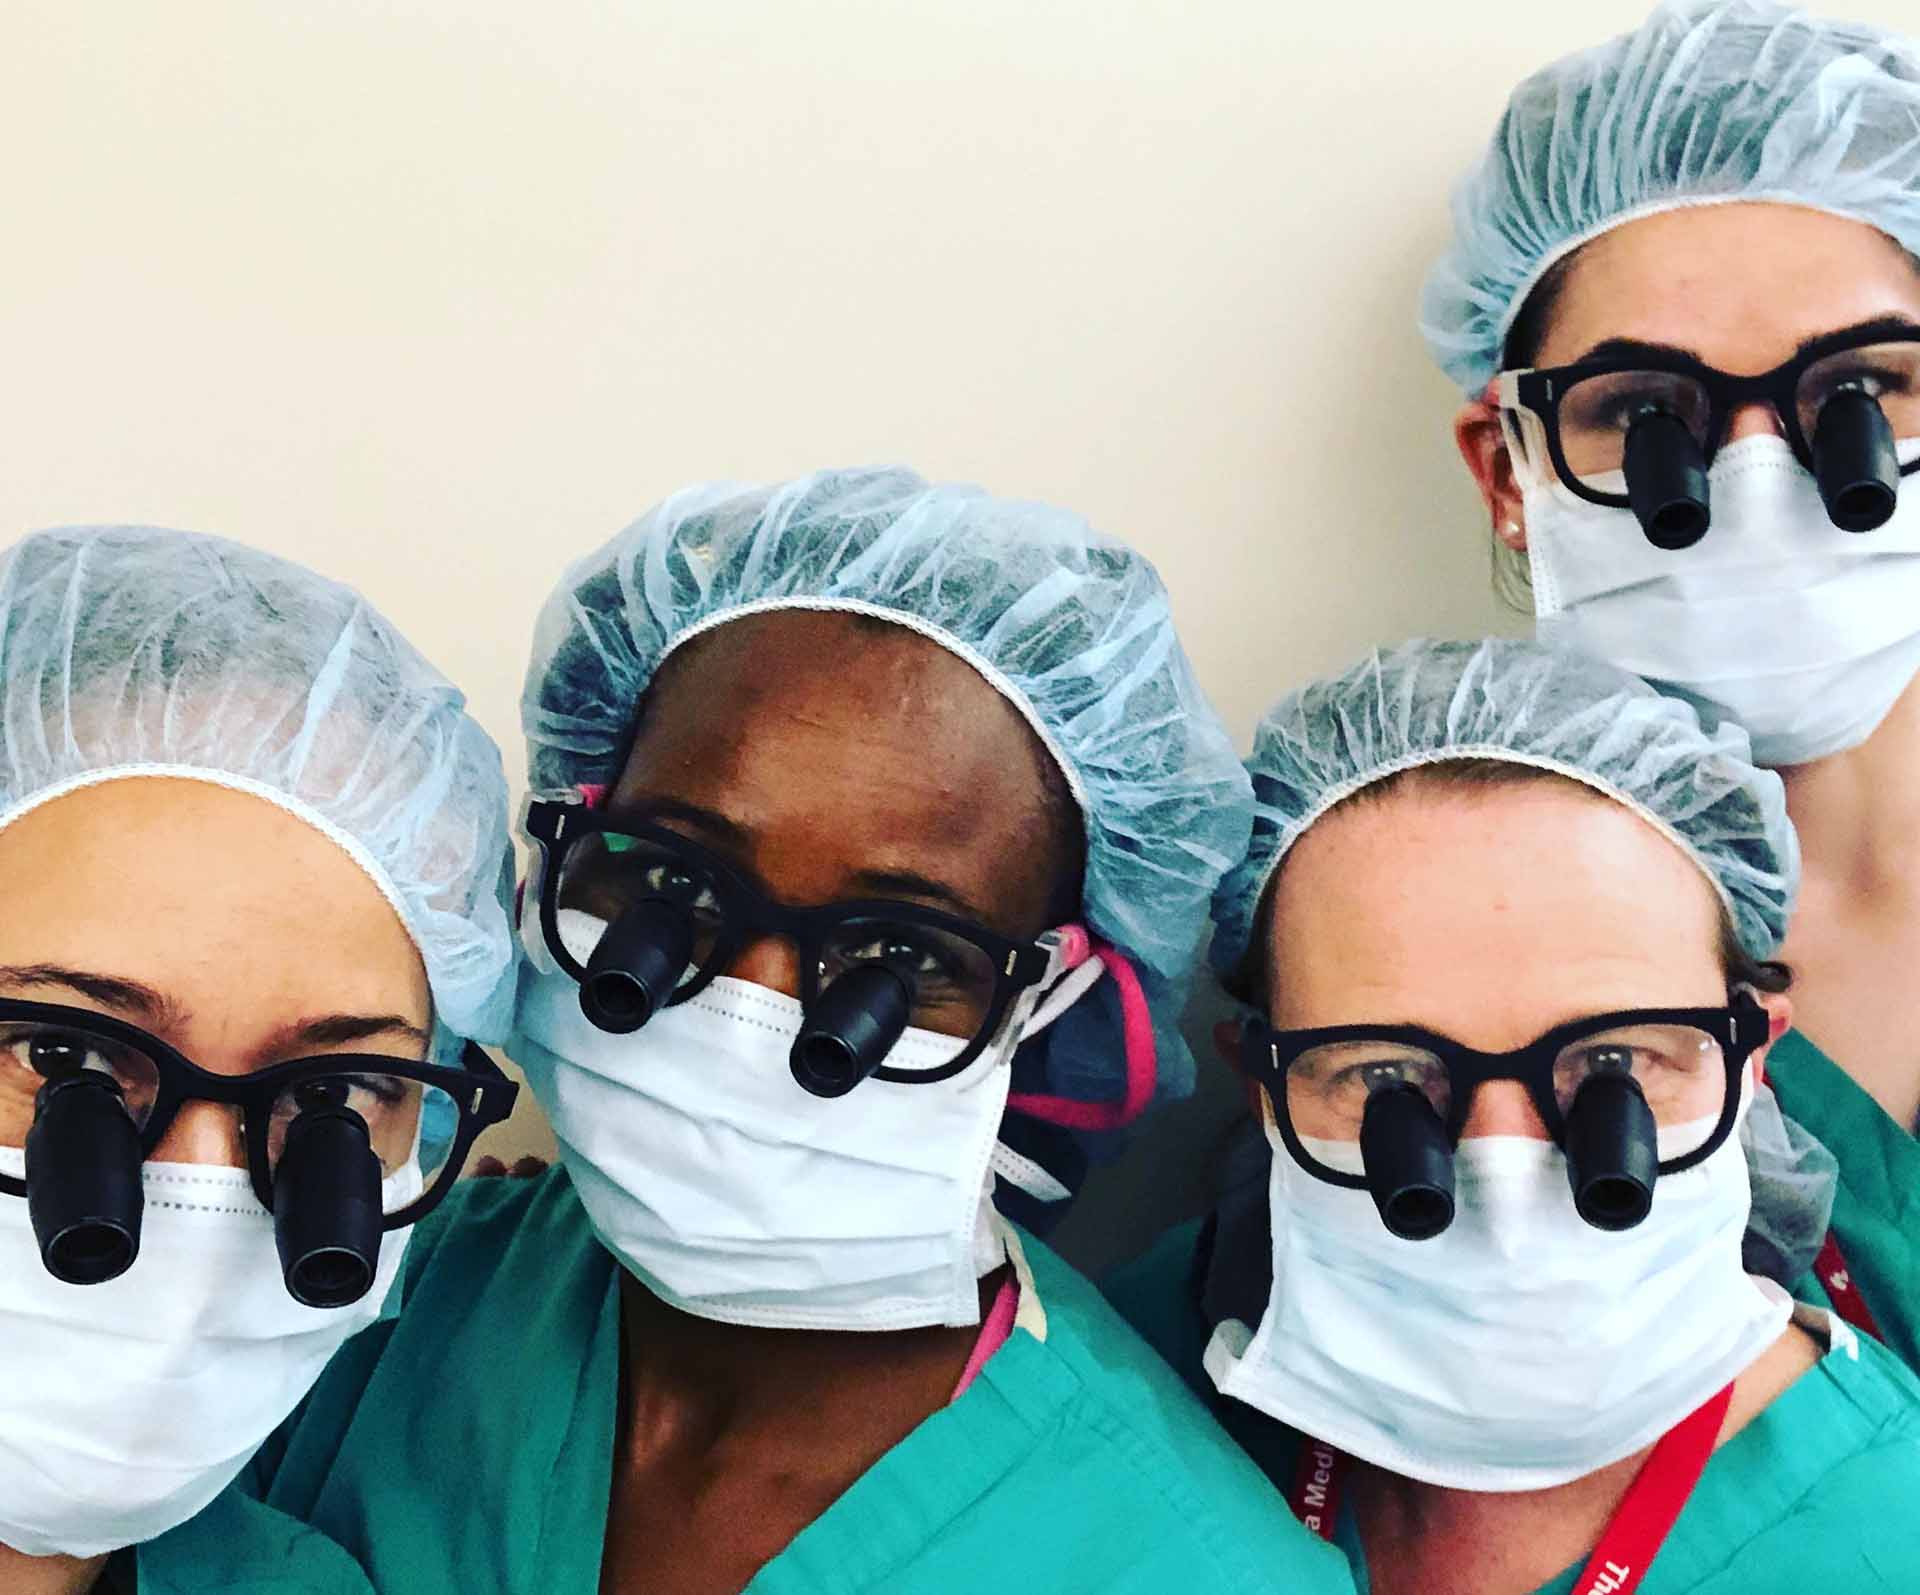 Four Transplant surgeons posing for a picture